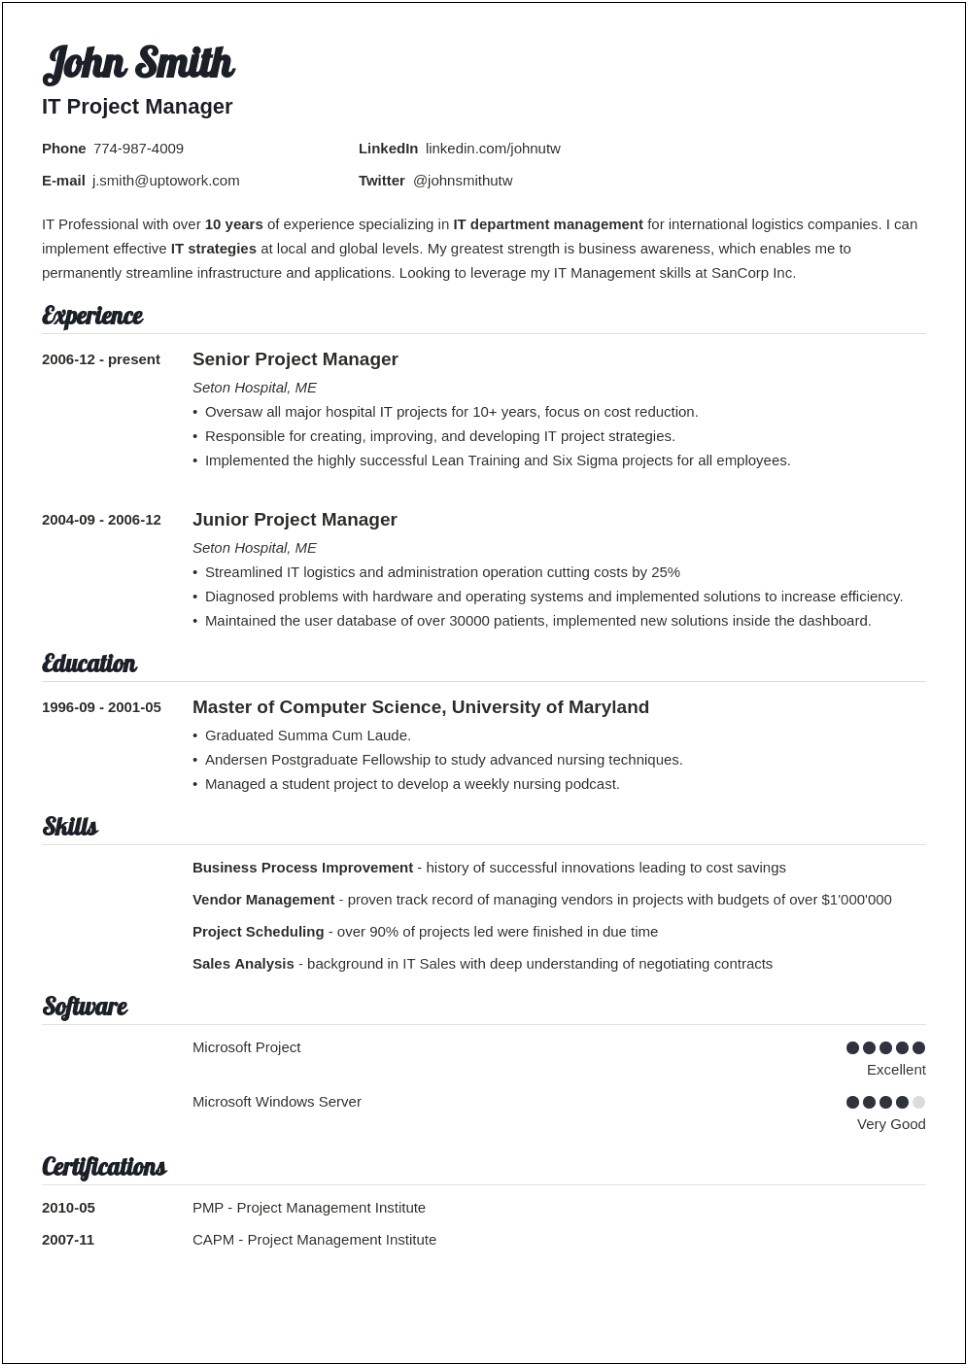 New Professional Job Search Resume Template 2018